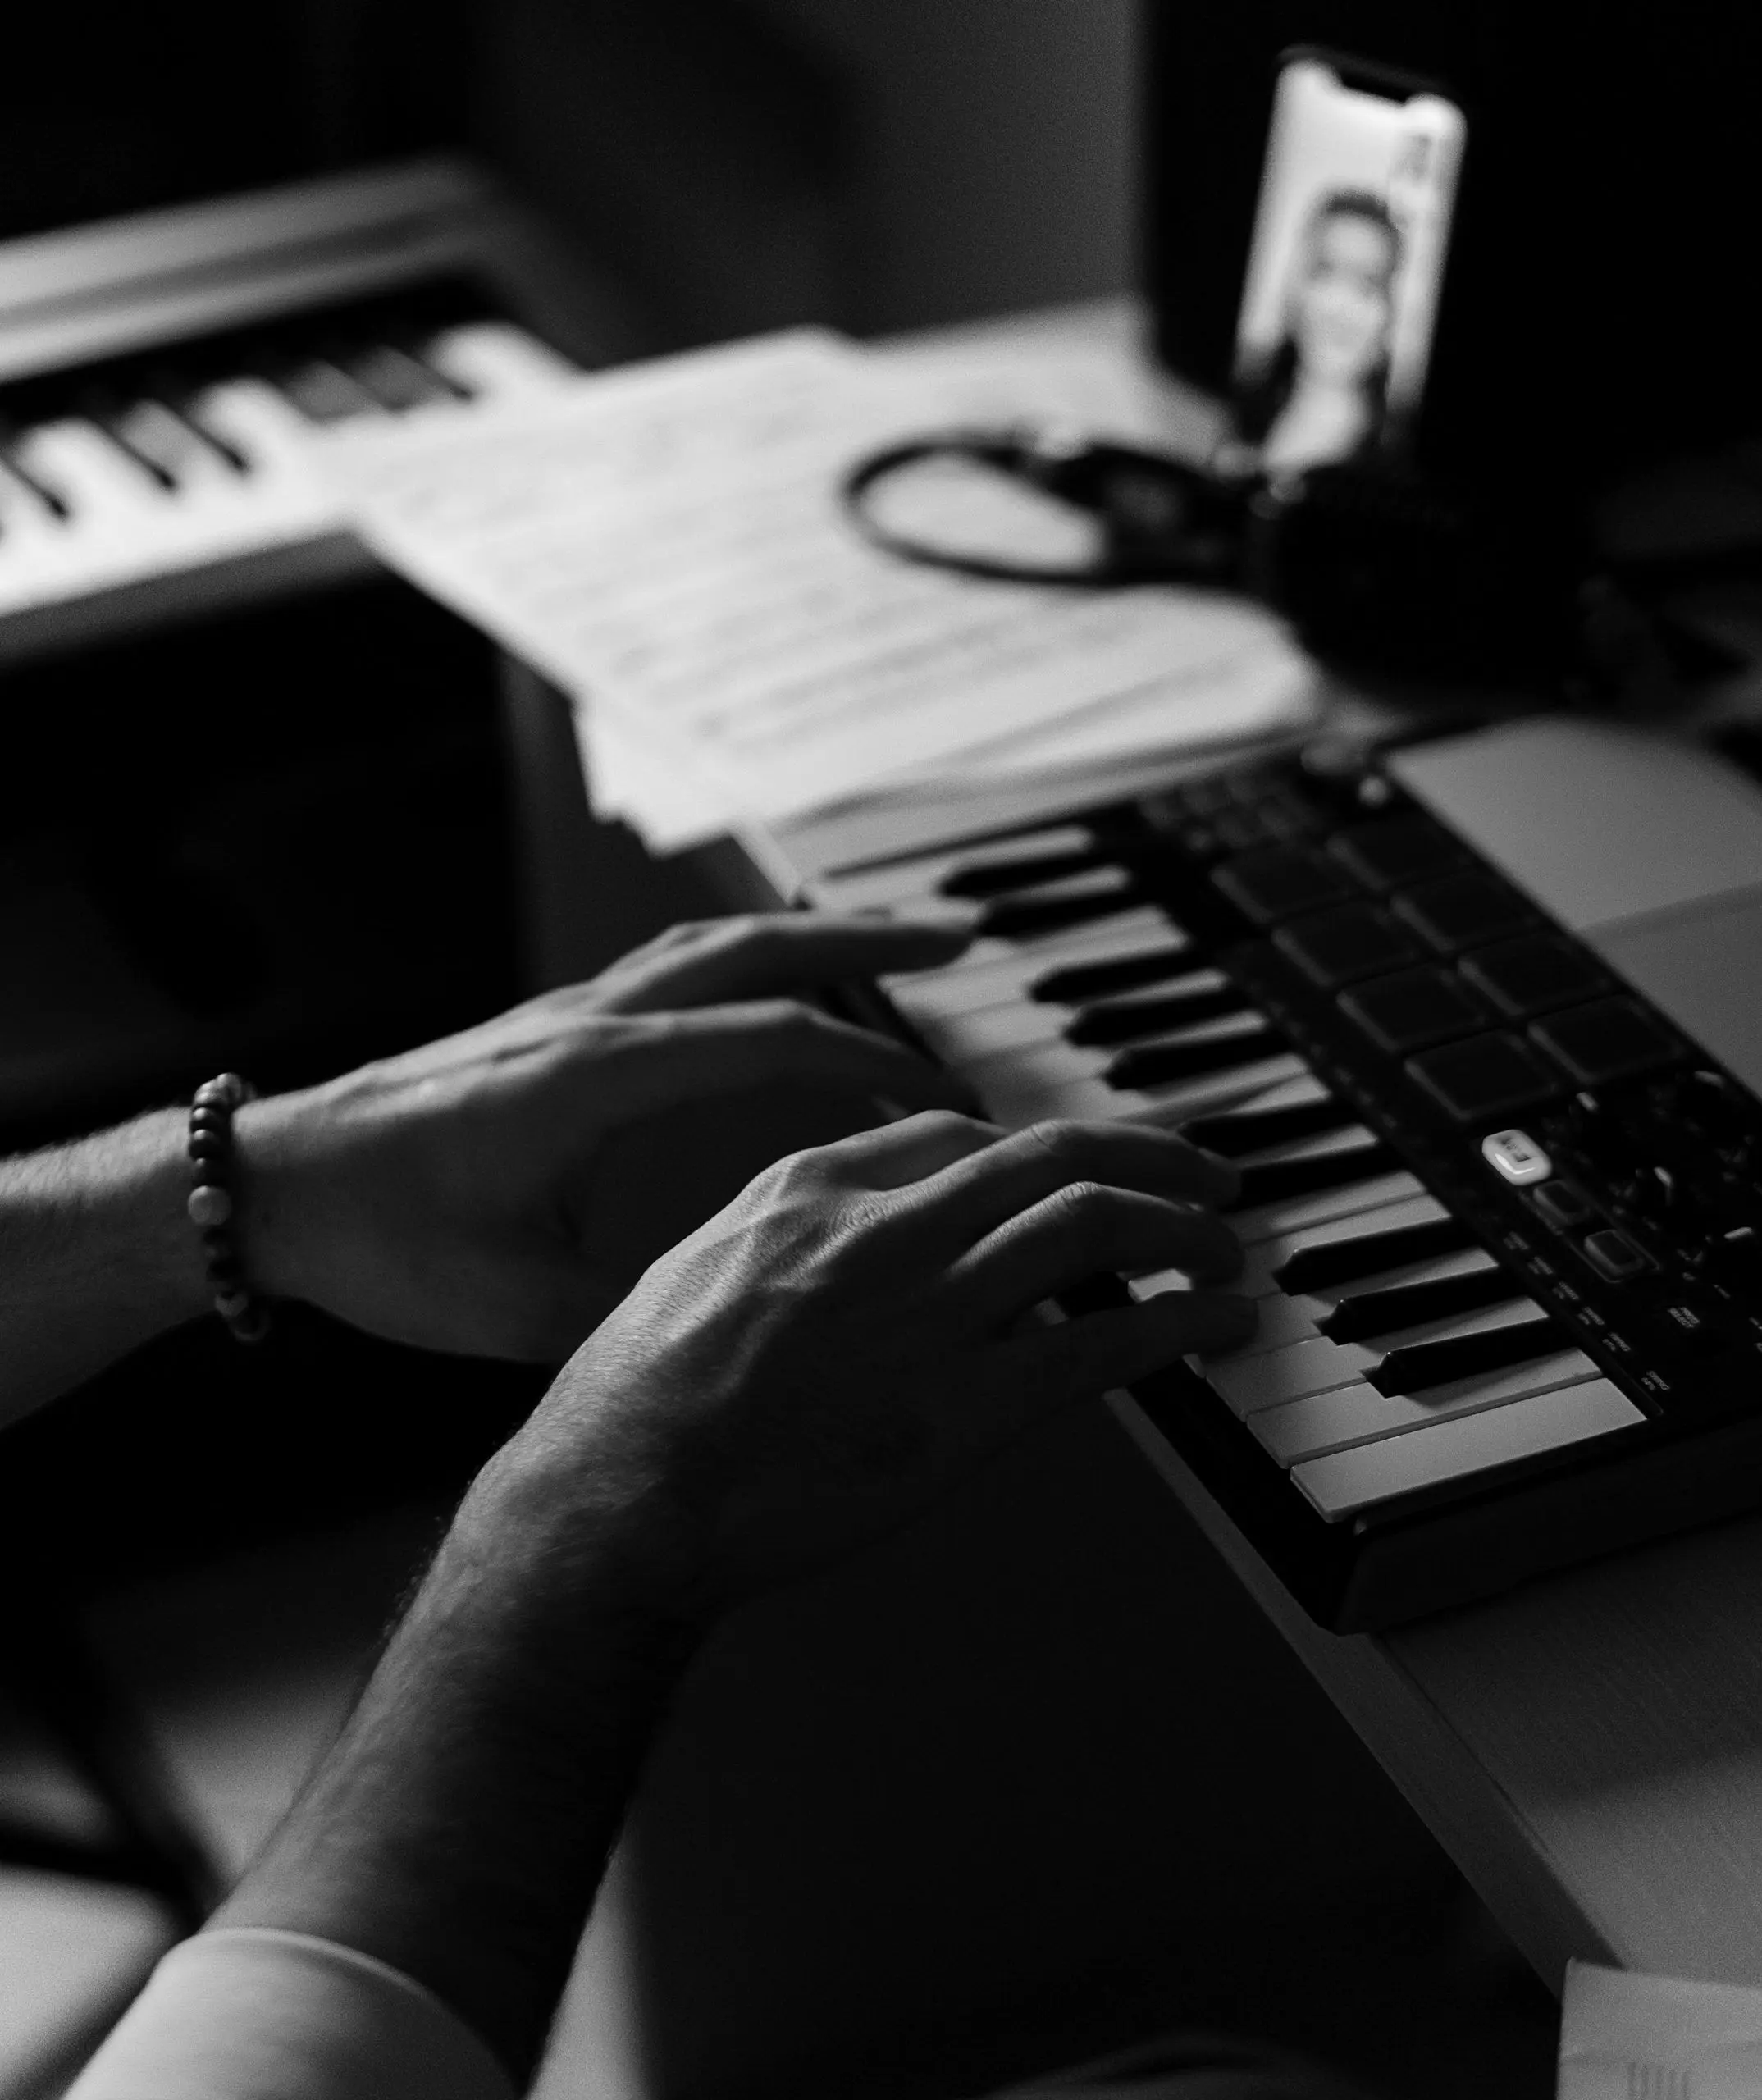 How to weave together a mesmerizing song? Our beginner's guide on "how to write a song" imparts inspiration and innovative ideas for those crafting their initial compositions.